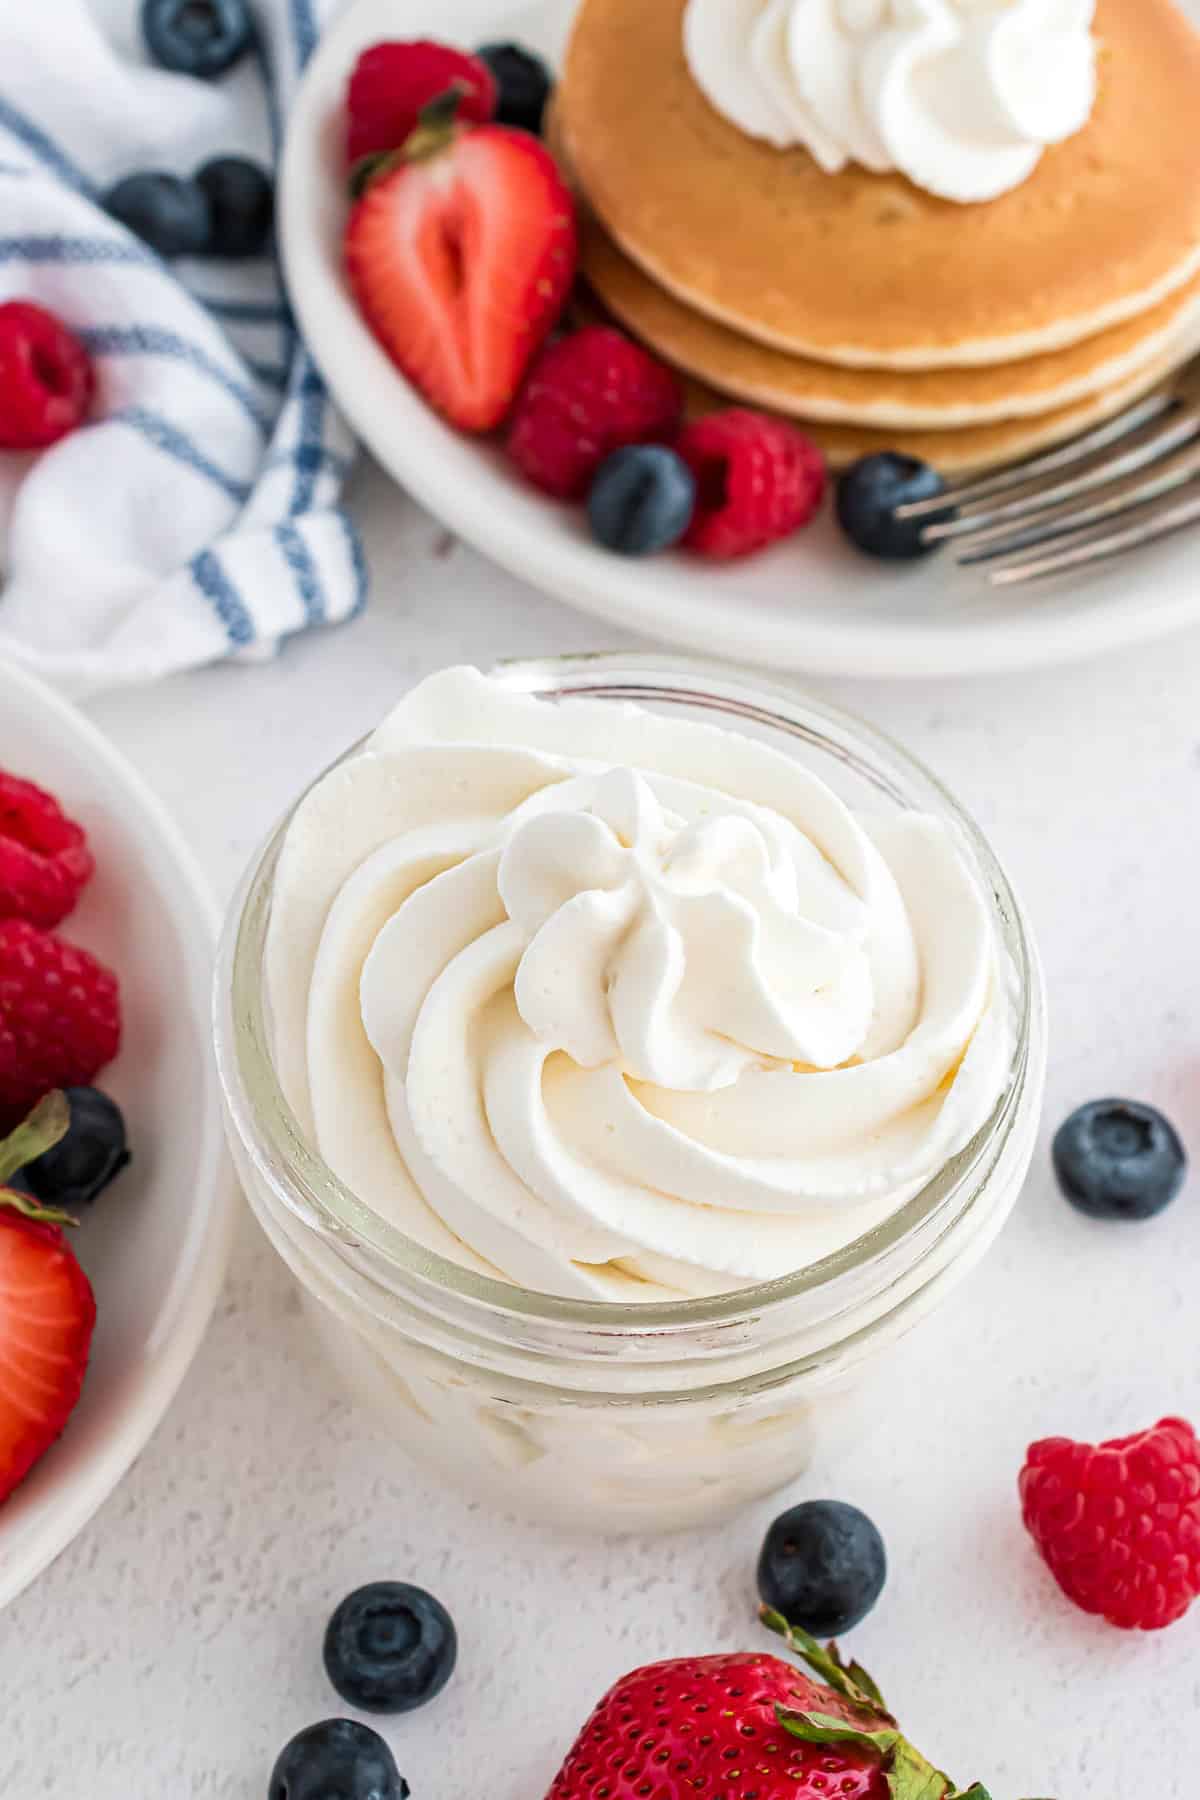 Whipped cream in a small jar, pancakes in background.